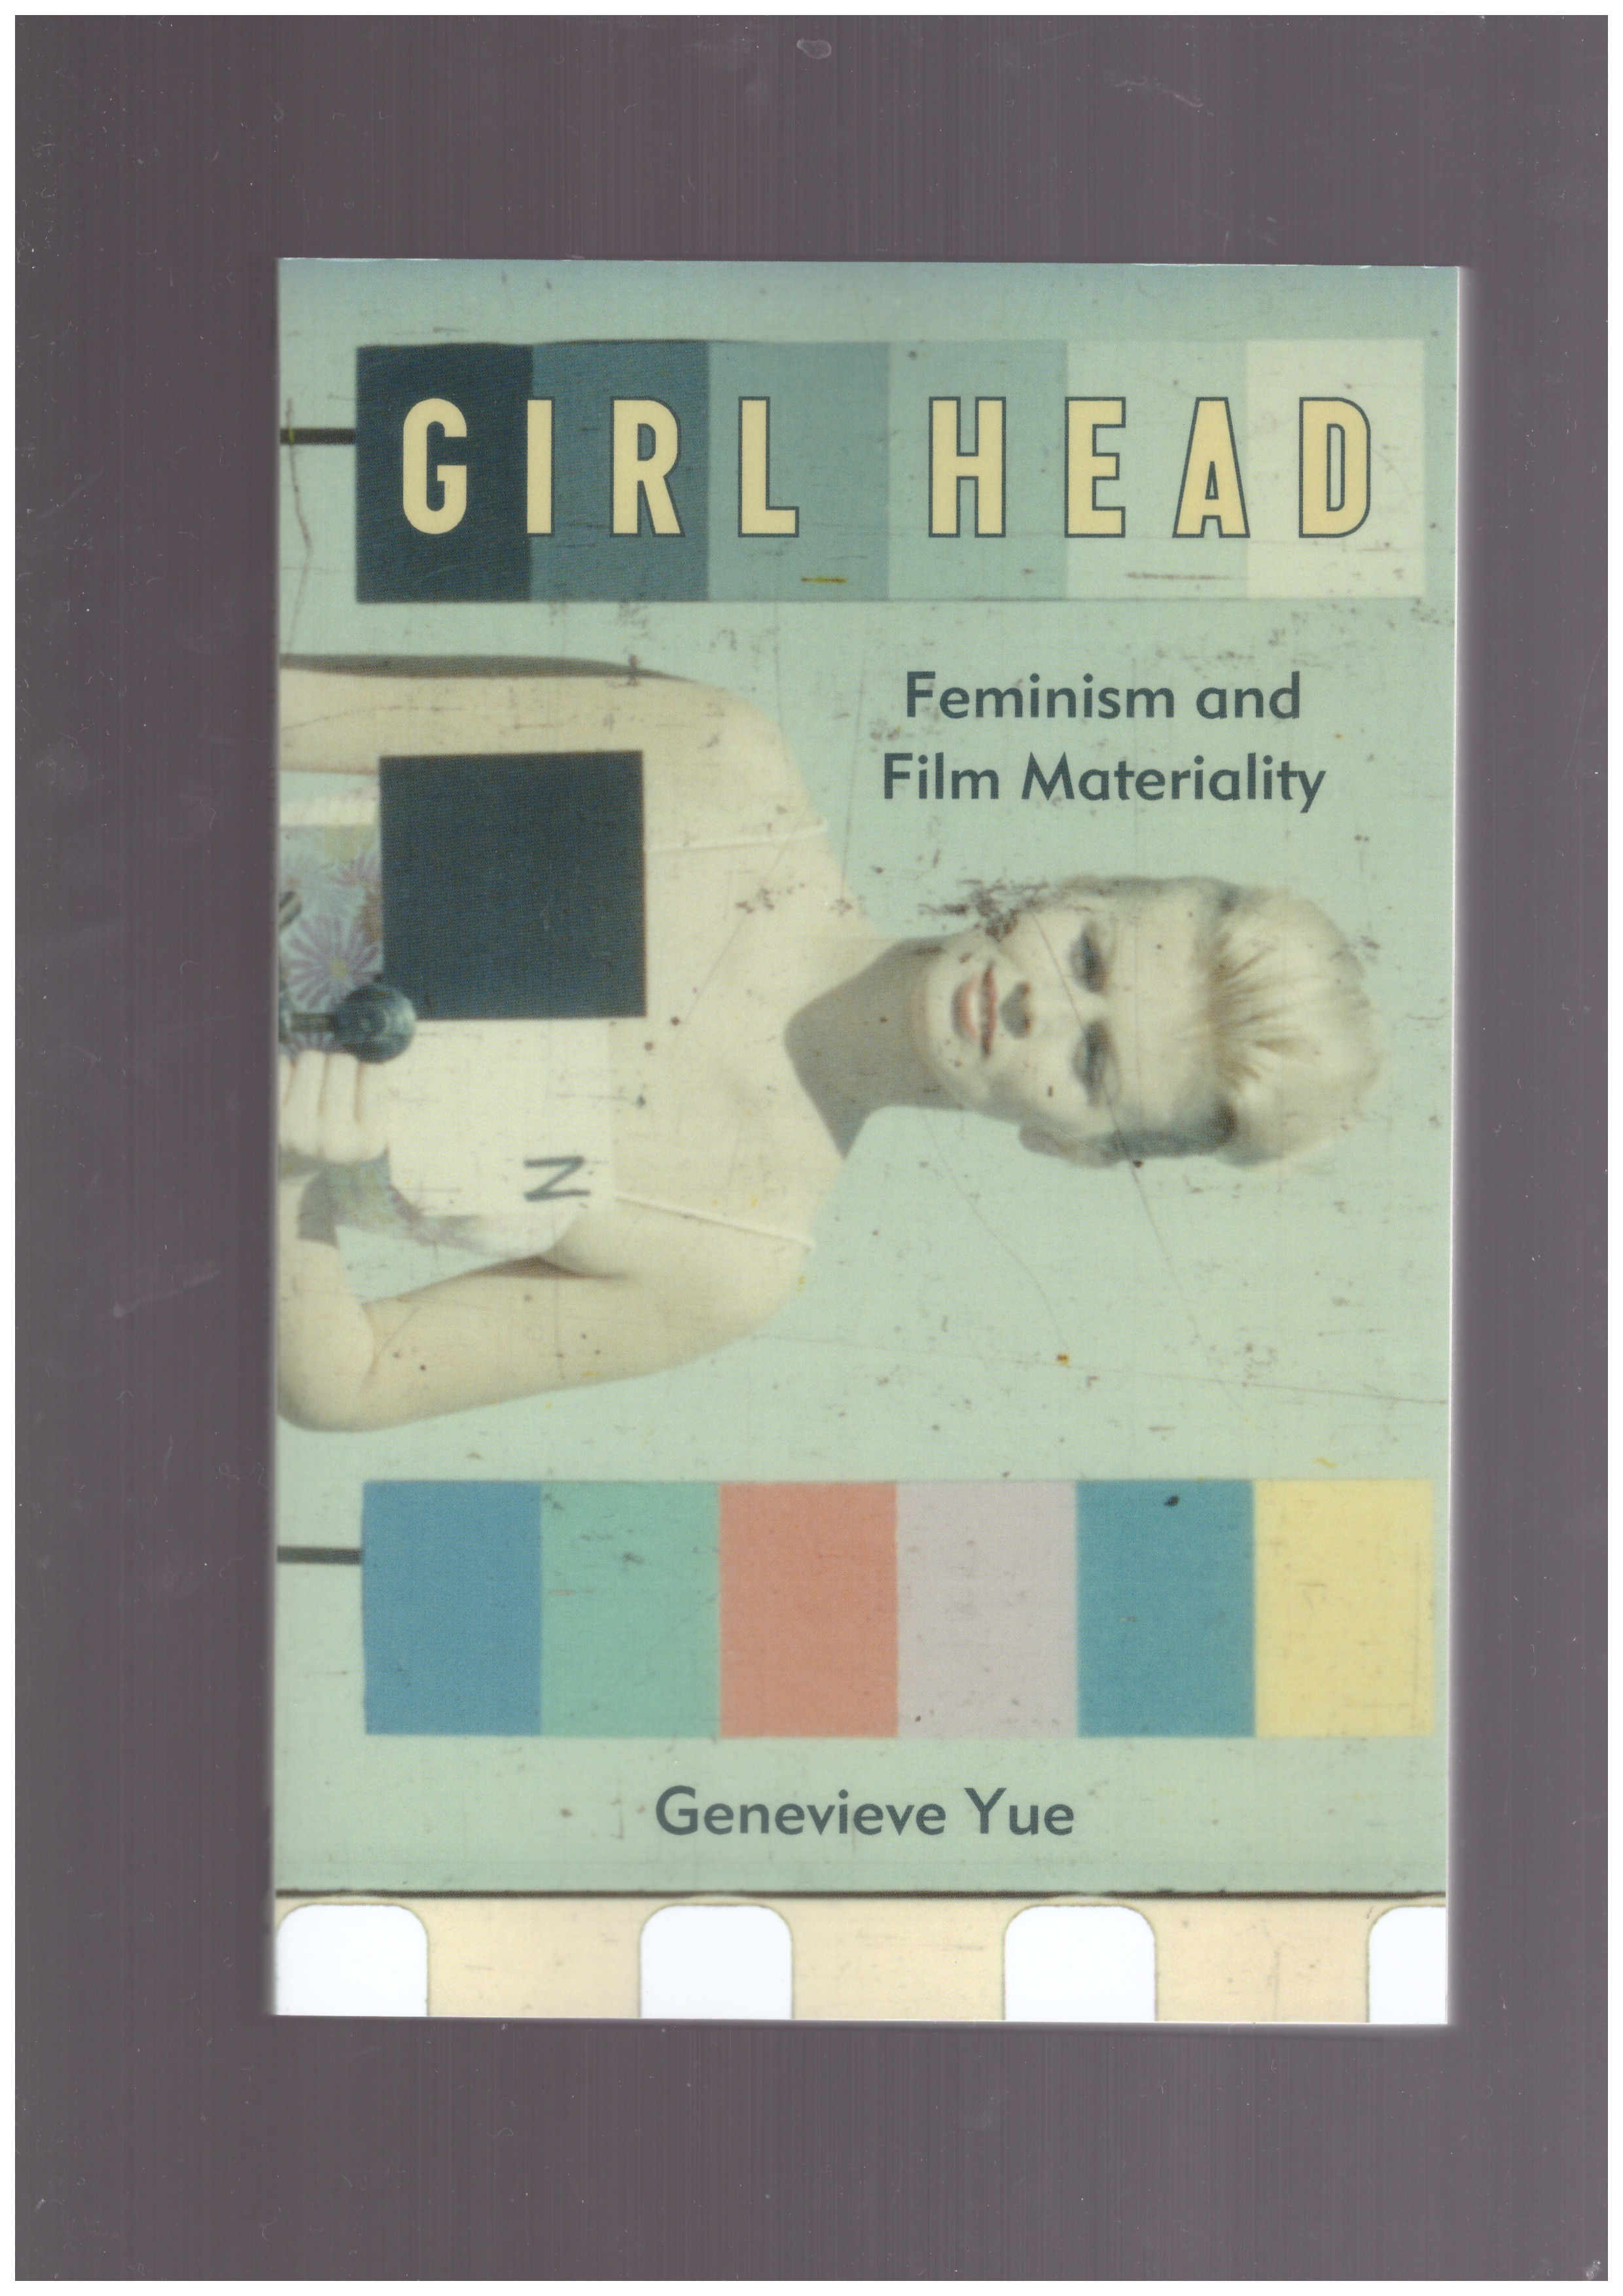 YUE, Genevieve - Girl Head. Feminism and Film Materiality